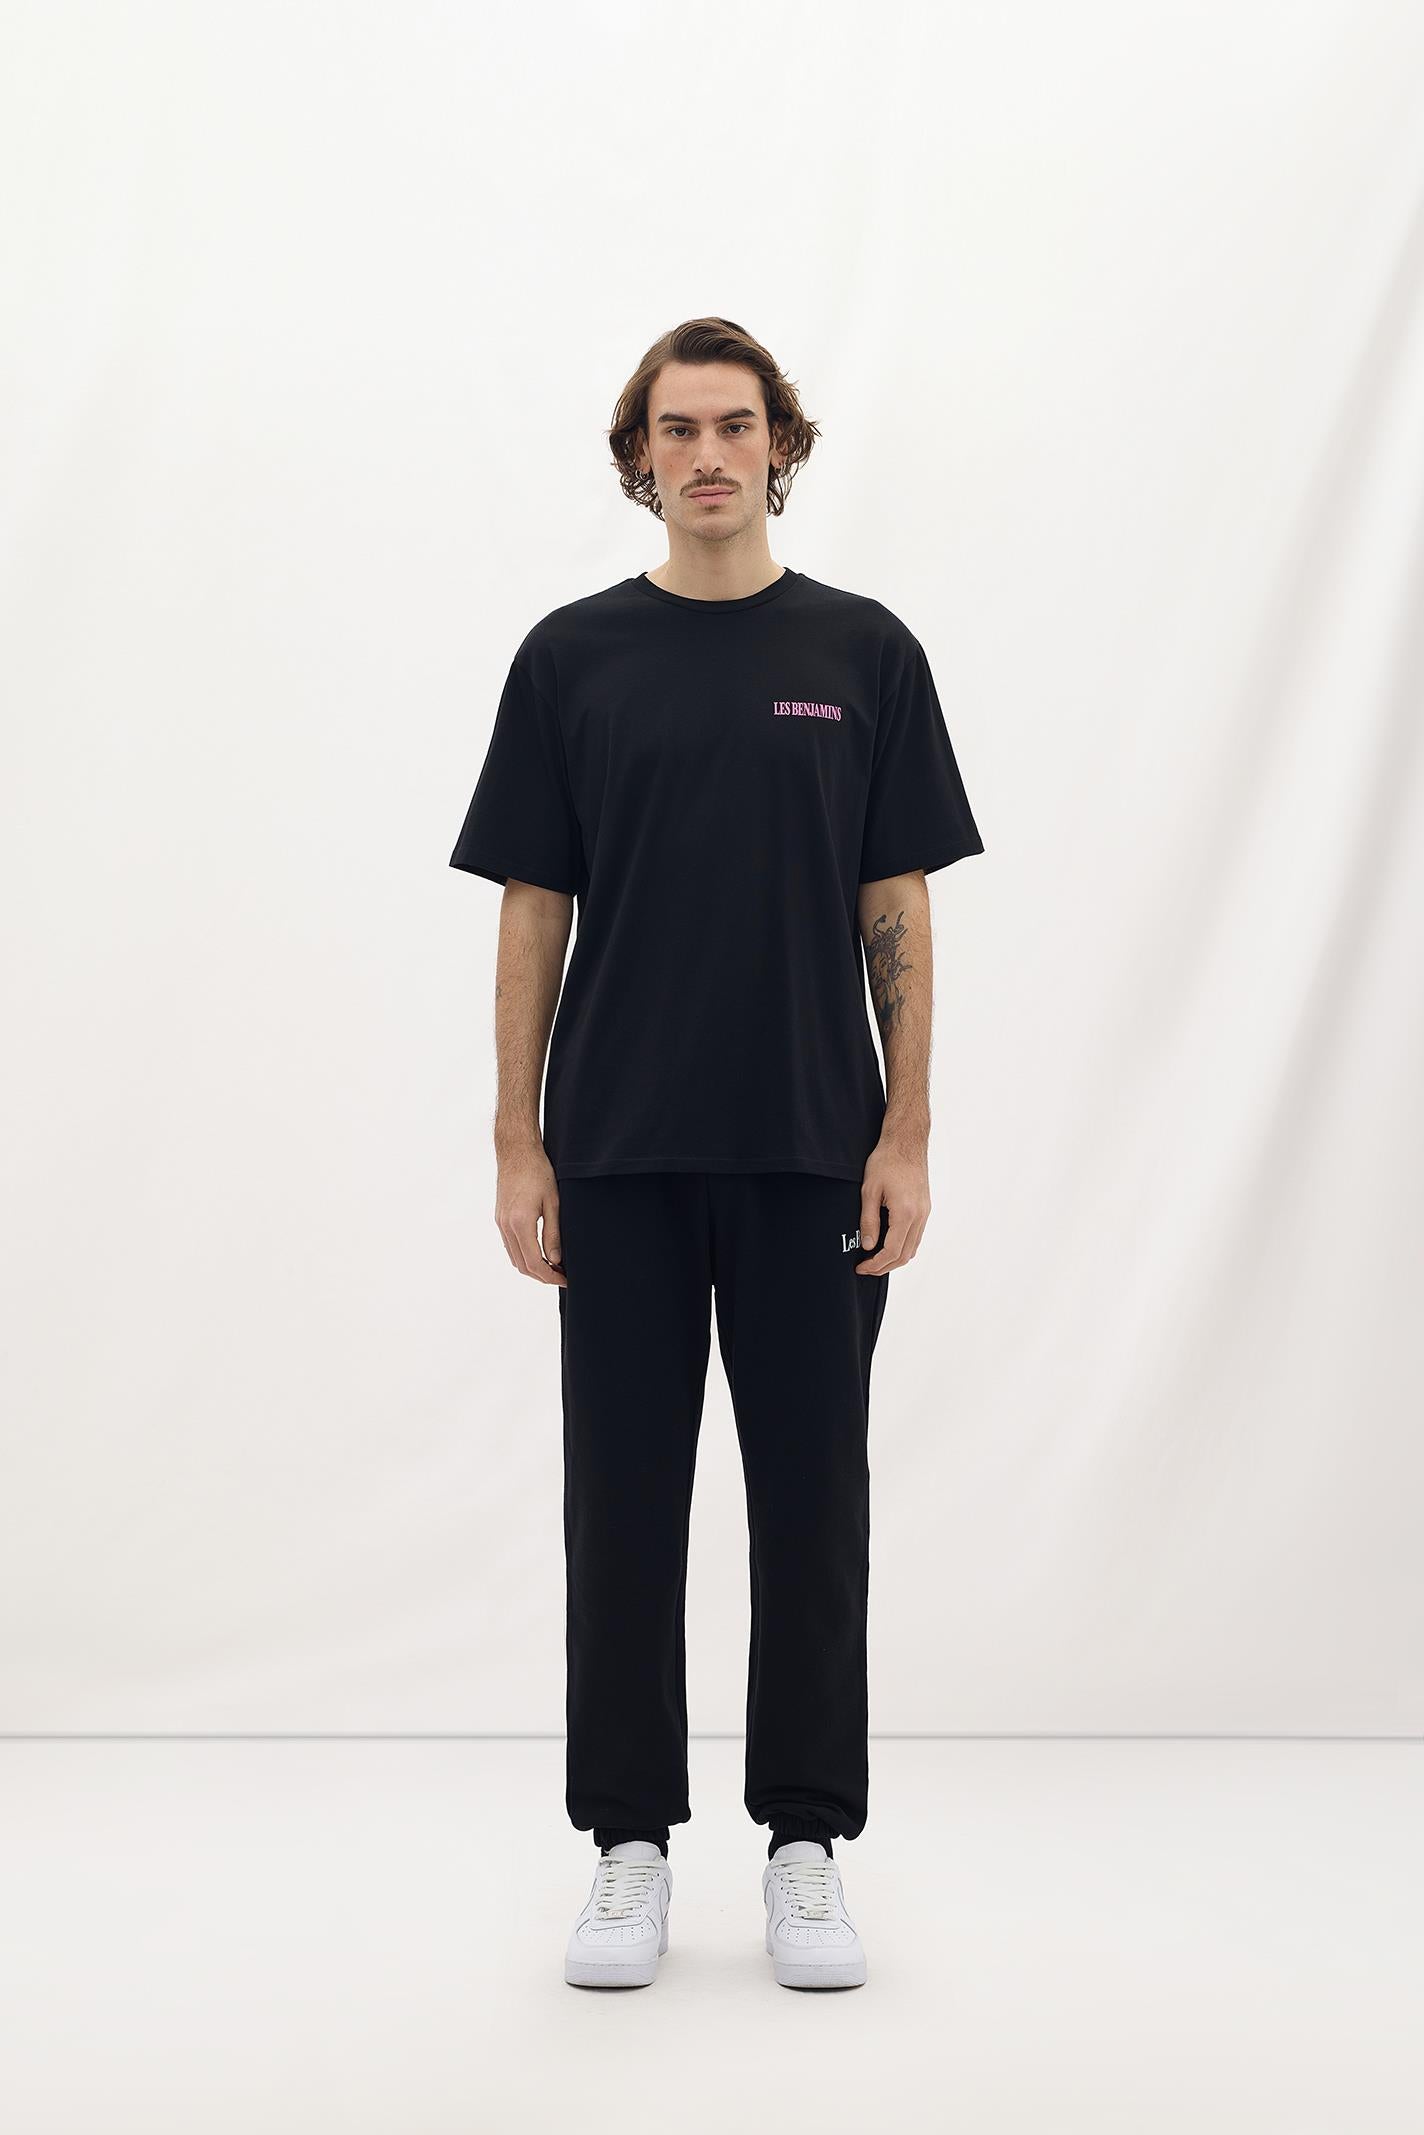 RELAXED SWEATPANT 004